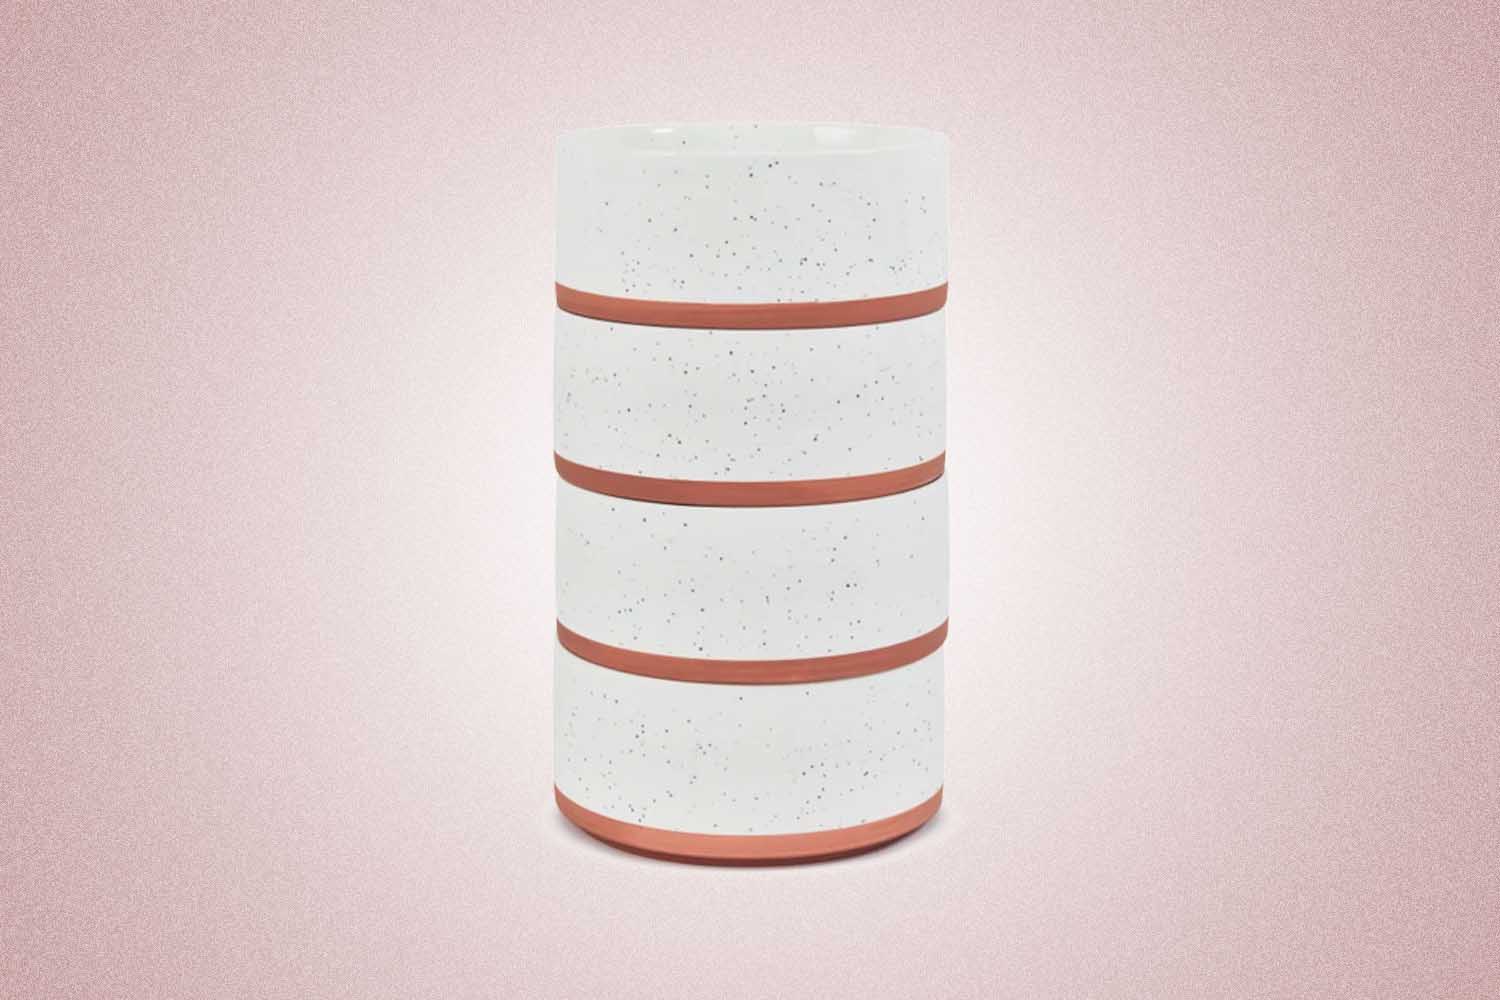 Four white speckled porcelain bowls with pink bottoms stacked on top of each other from Our Place, a perfect Valentine’s Day gift for 2022, on a pink background.